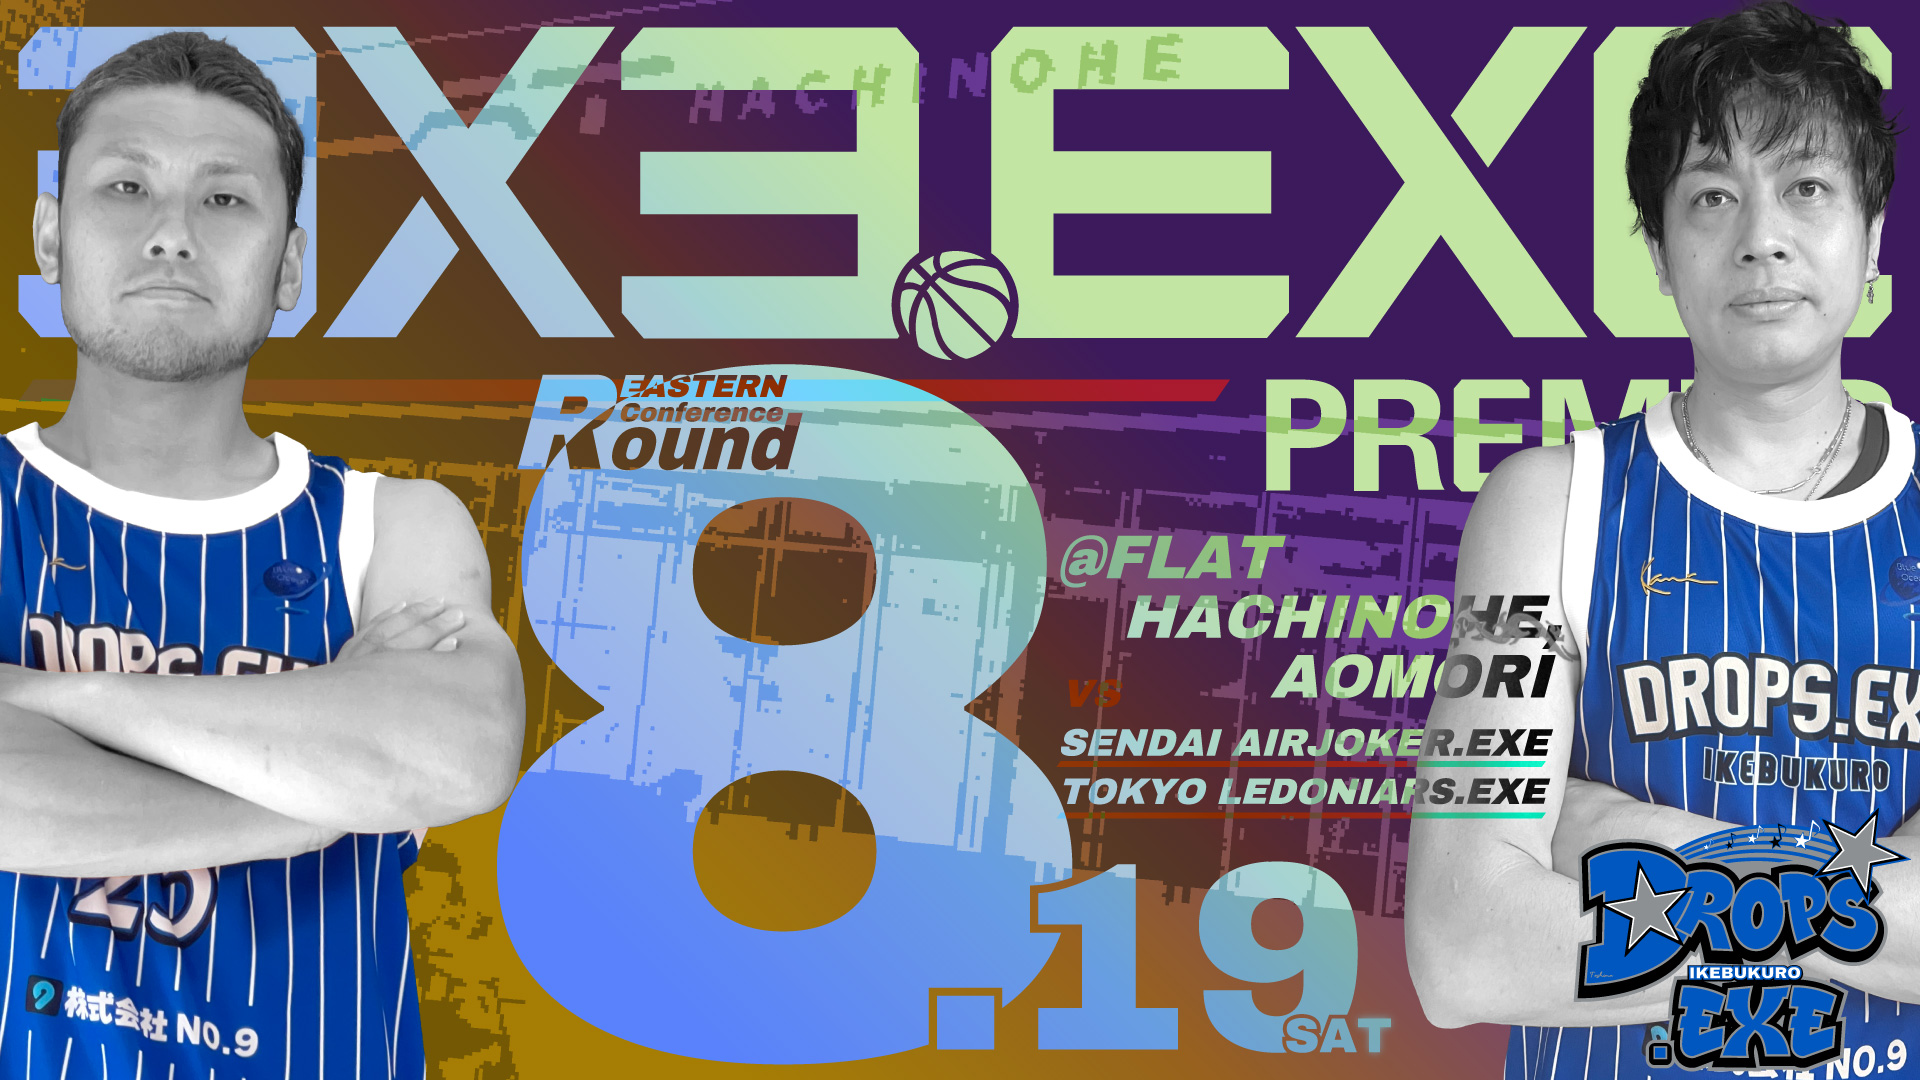 【ROSTER】 EASTERN Conference Round.8 @FLAT HACHINOHE 青森 8/19(SAT)